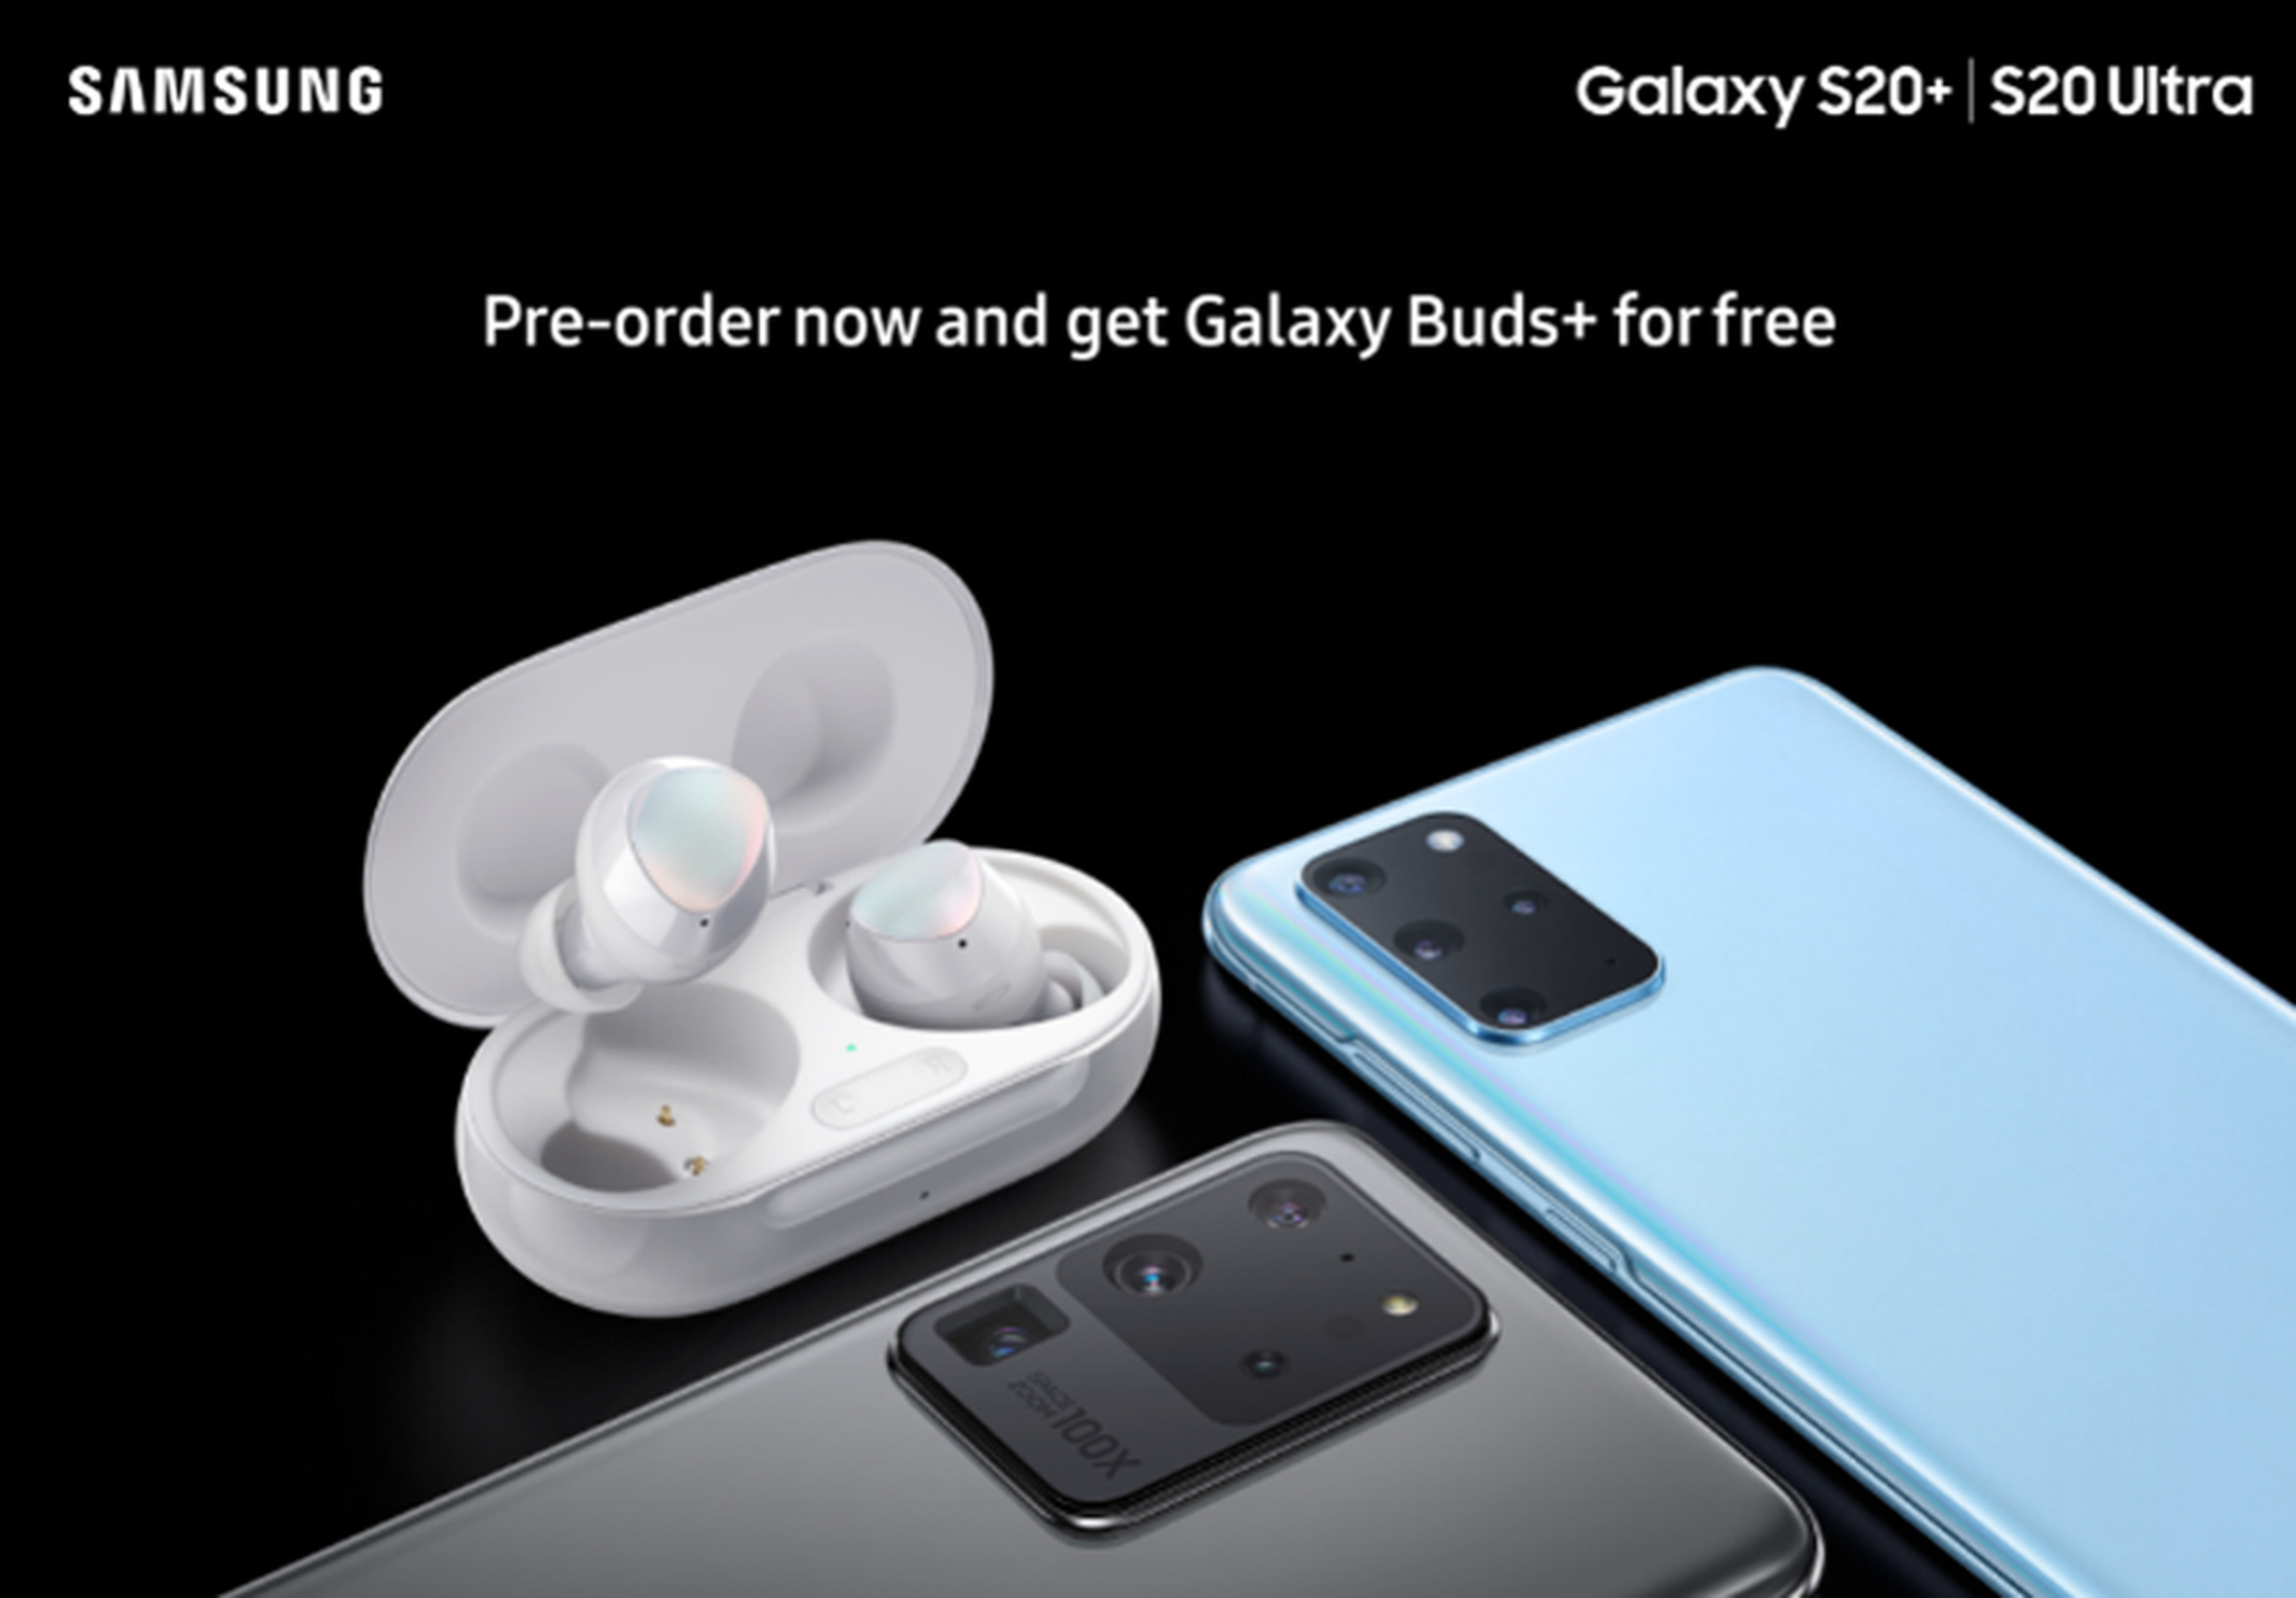 The new Galaxy Buds may be offered as a preorder incentive alongside the S20 Plus and S20 Ultra.